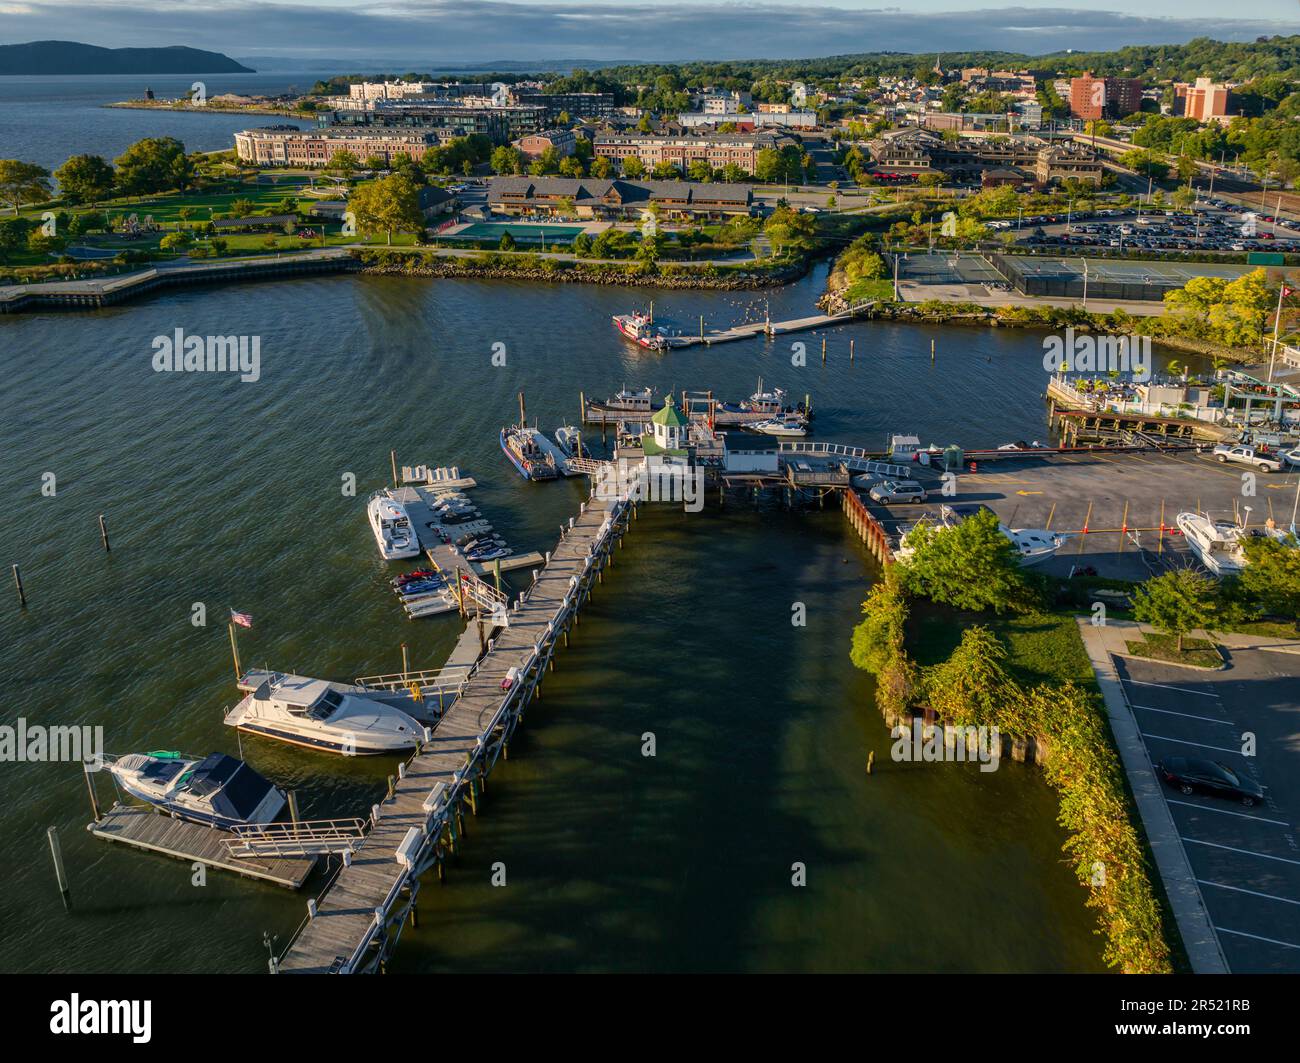 Tarrytown Sleepy Hollow NY - Aerial view during sunset.   The village of Tarrytown is in the town of Greenburgh in Westchester County, New York, Unite Stock Photo